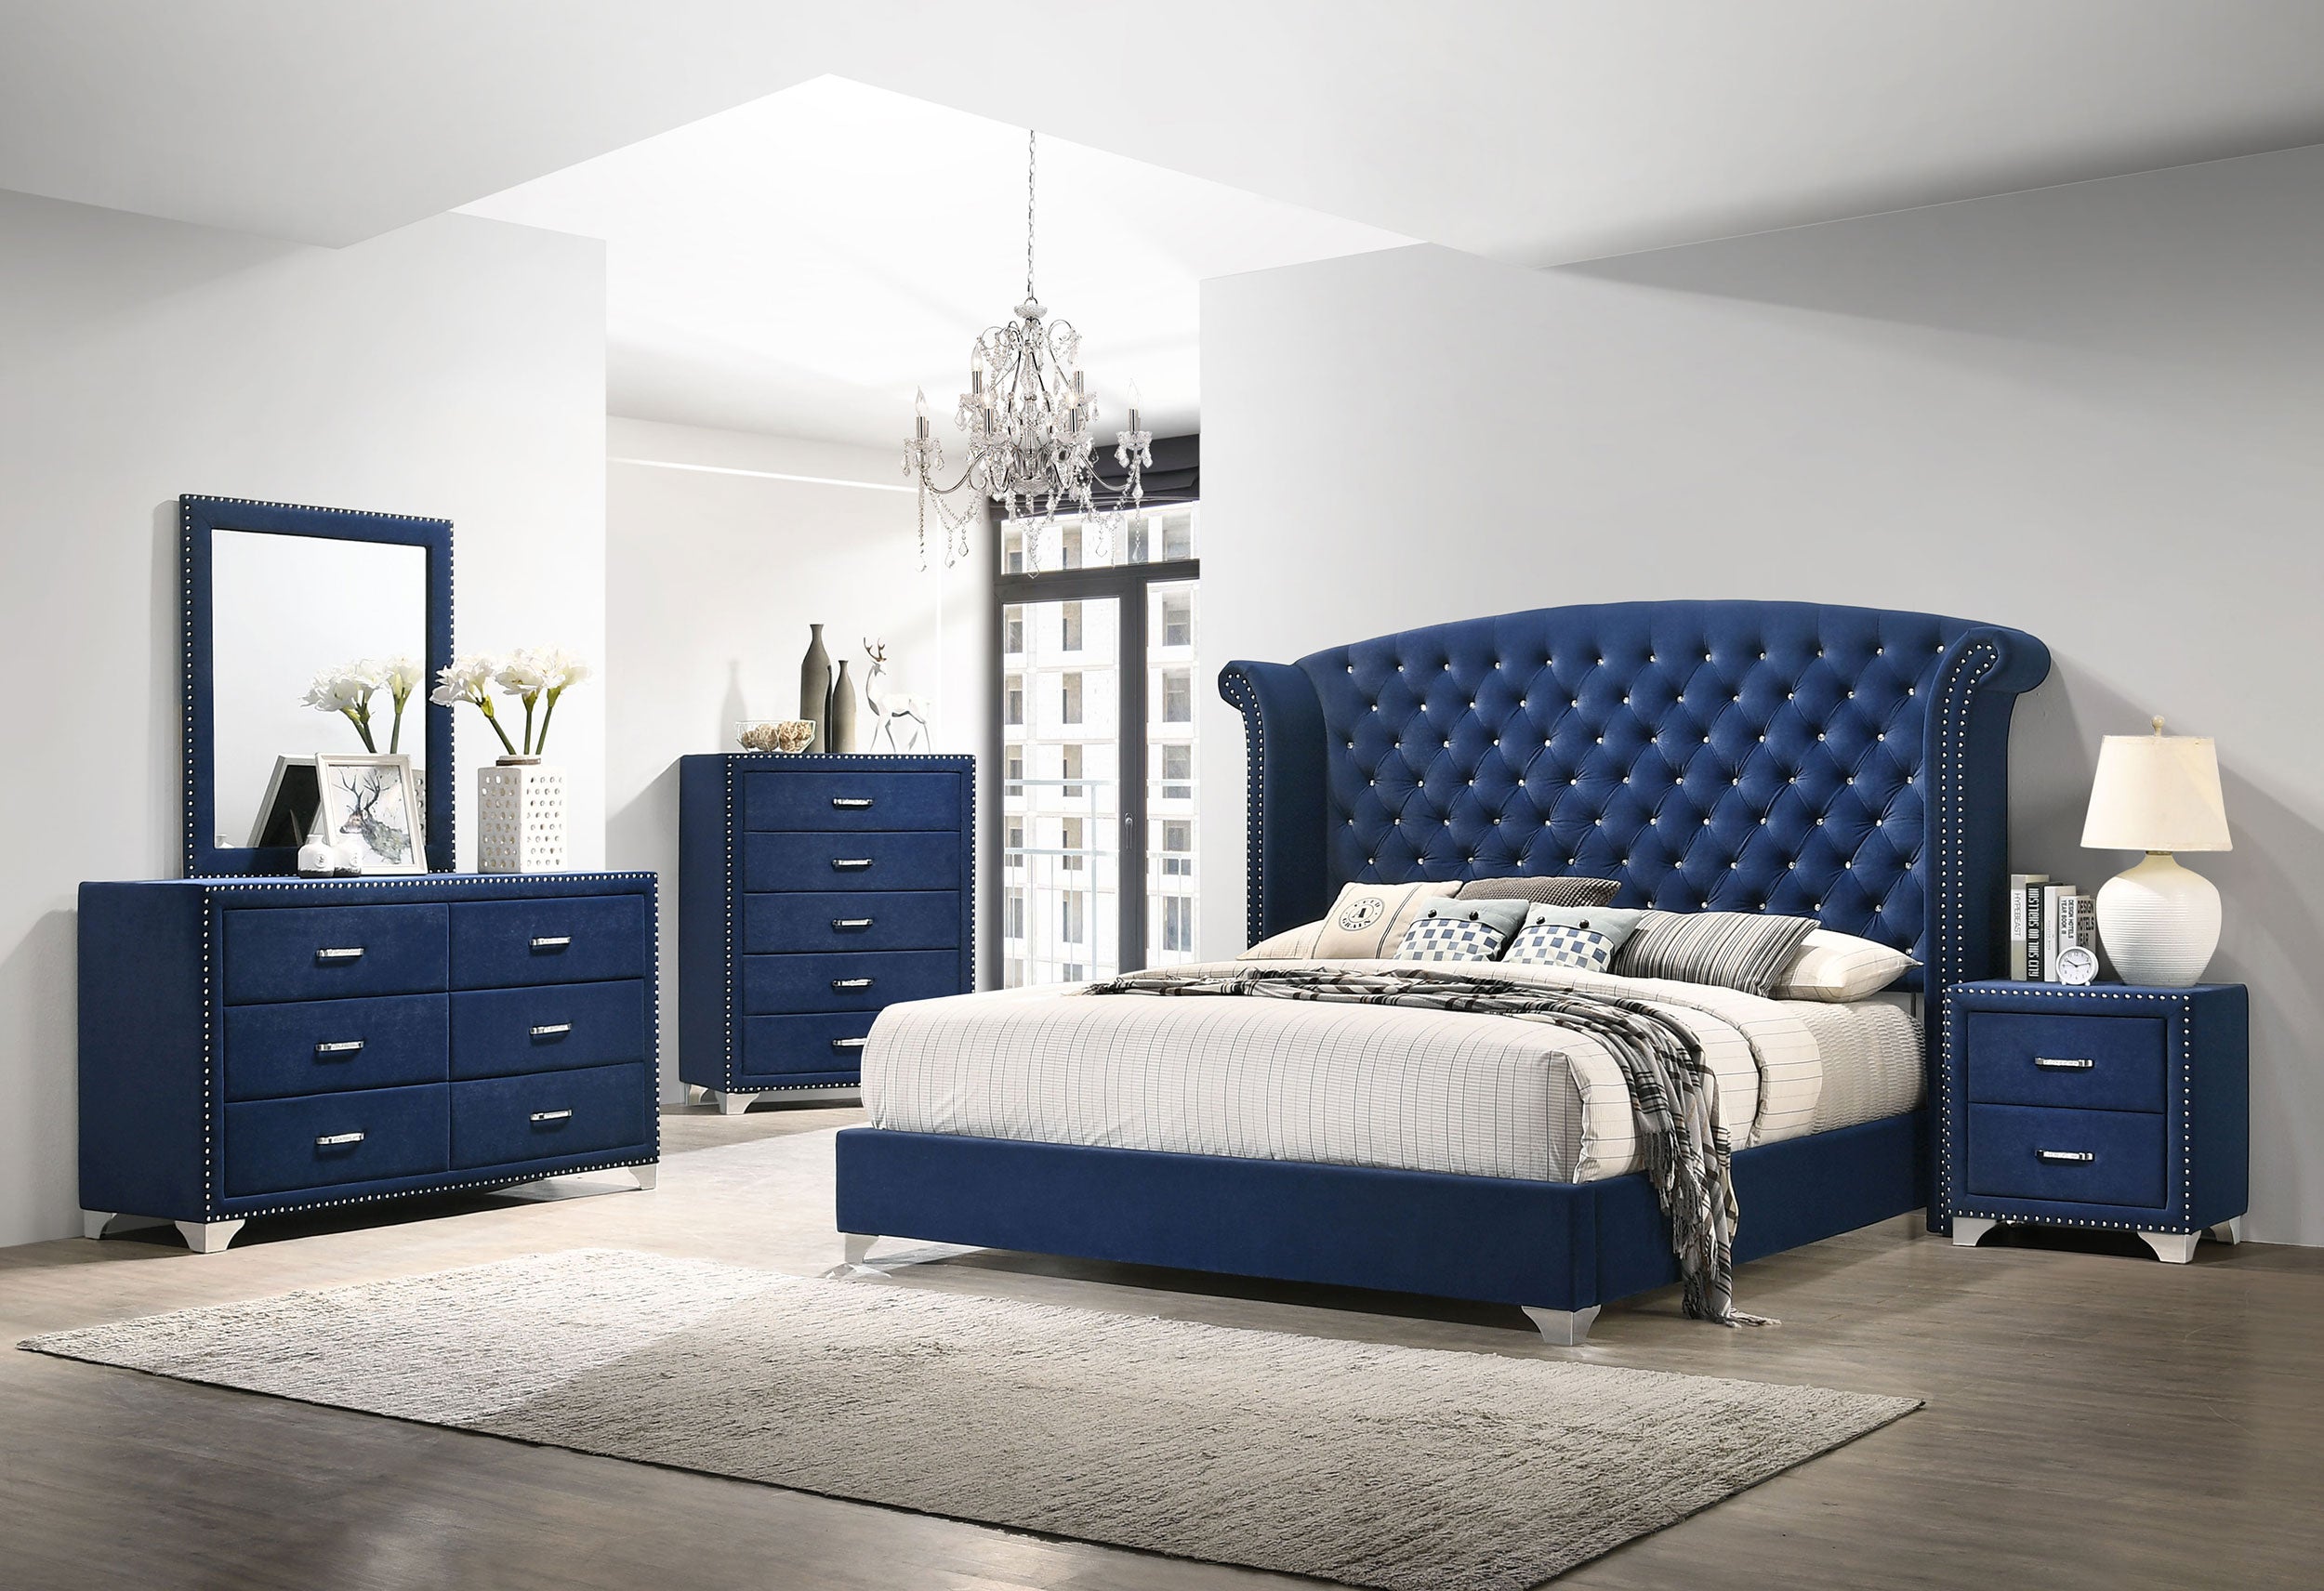 Coaster Melody Tufted Upholstered Bedroom Set Pacific Blue Cal King Set of 4